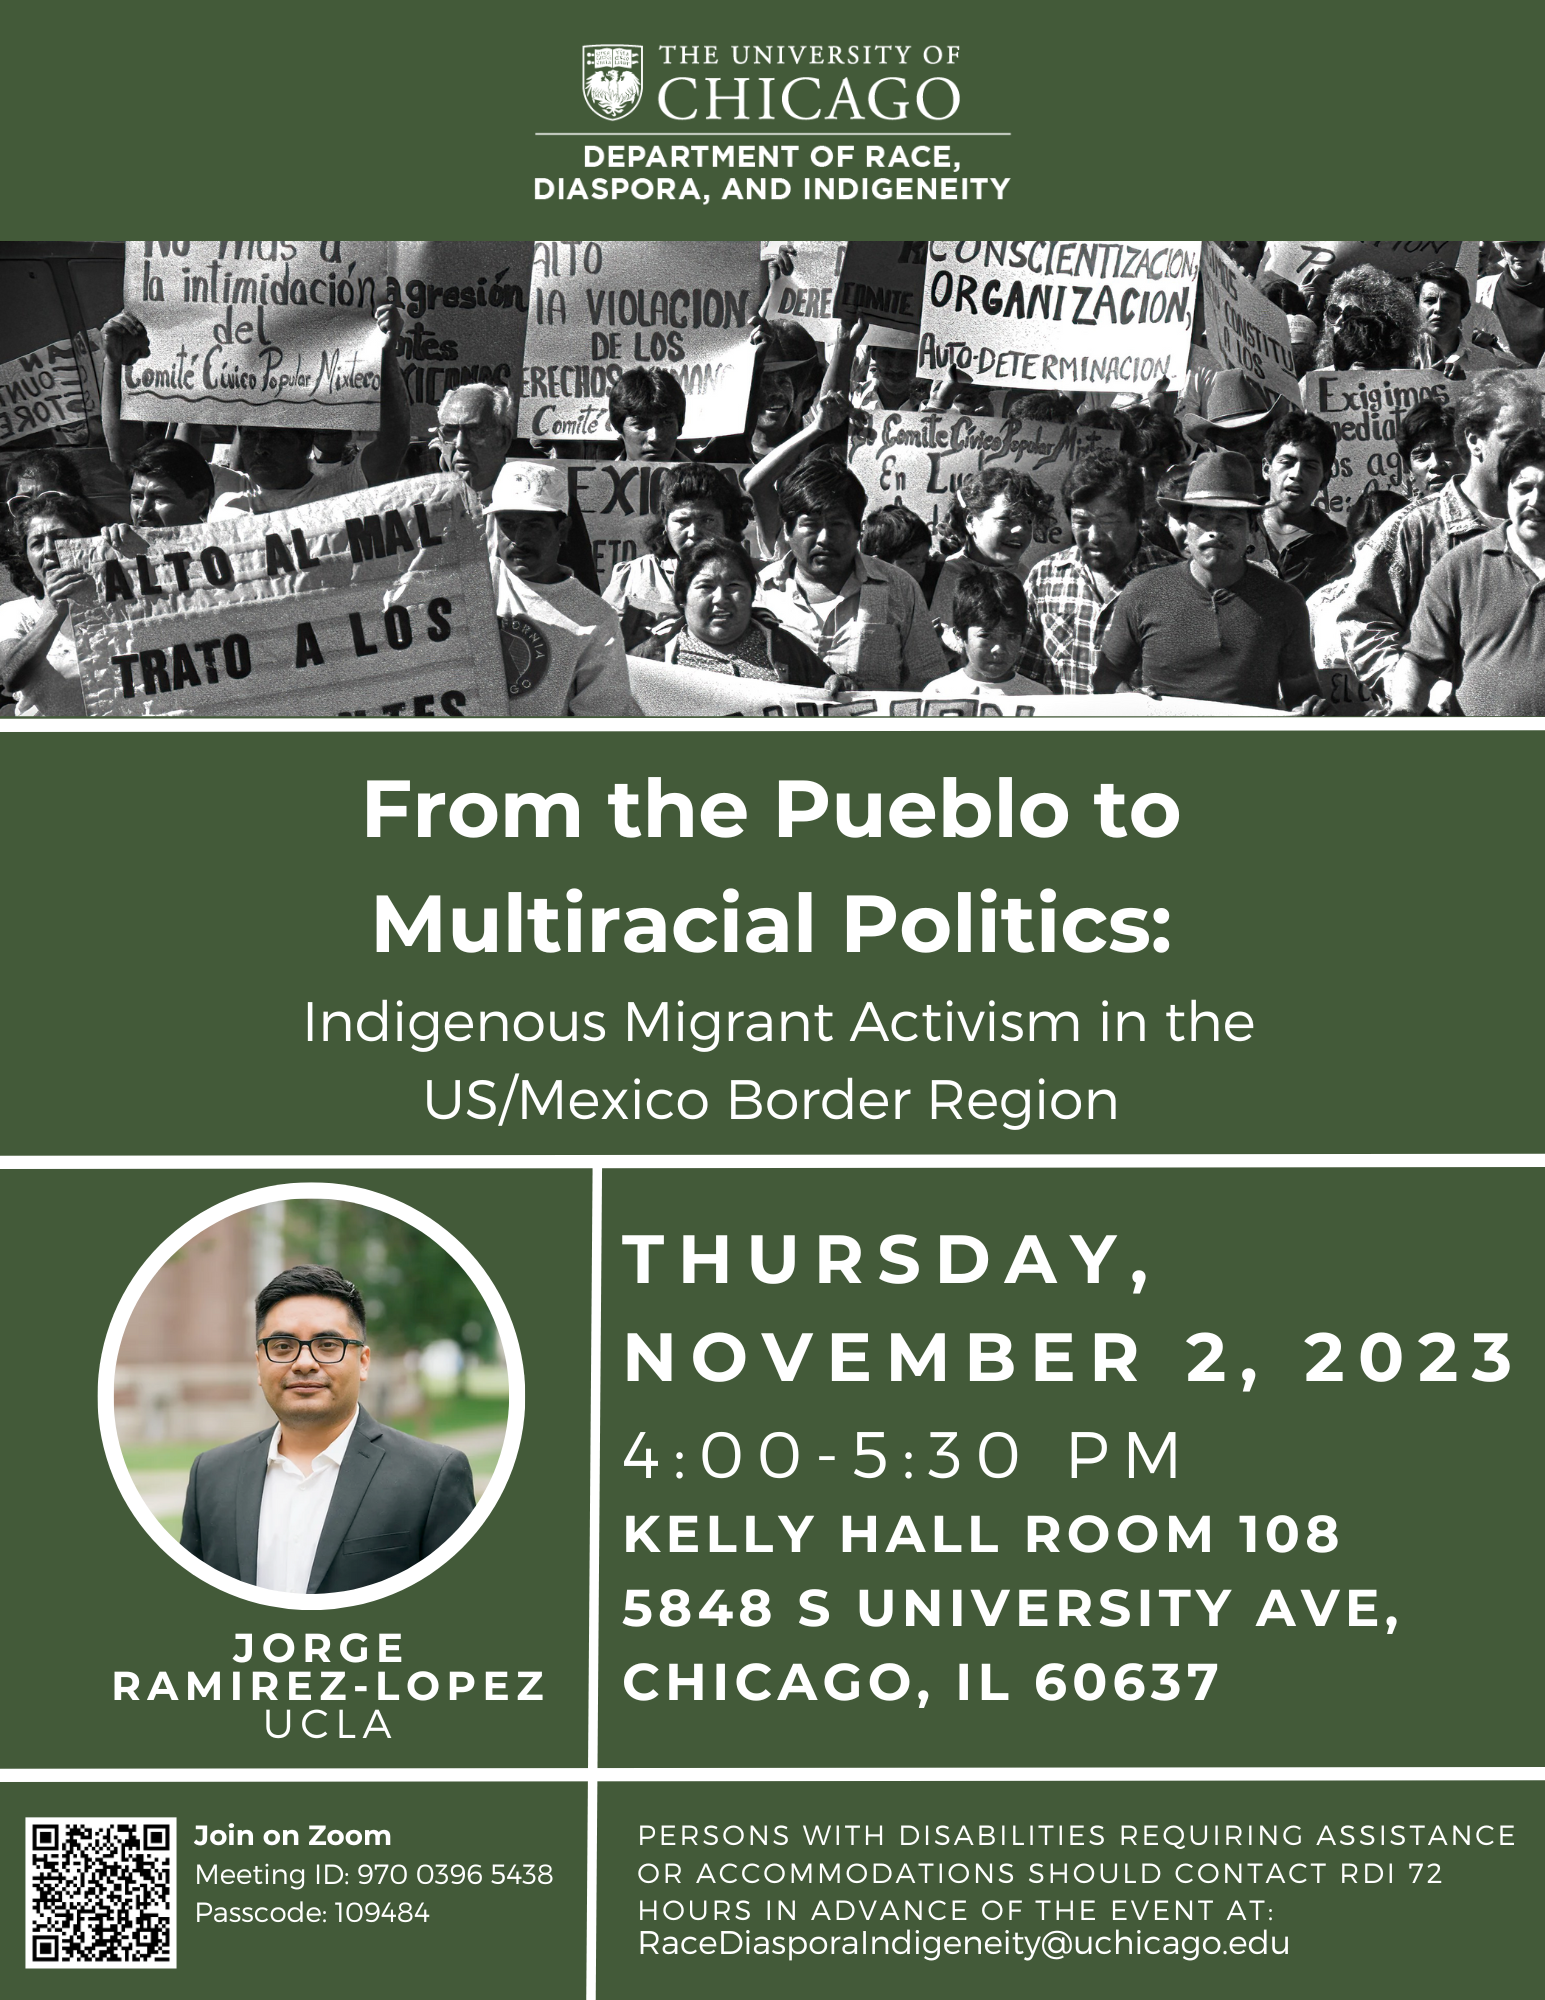 From the Pueblo to Multiracial Politics:  Indigenous Migrant Activism in the US/Mexico Border Region Thursday,  November 2, 2023 4:00-5:30 PM Kelly Hall room 108 5848 S University Ave, Chicago, IL 60637 Persons with disabilities requiring assistance or accommodations should contact RDI 72 hours in advance of the event at: RaceDiasporaIndigeneity@uchicago.edu